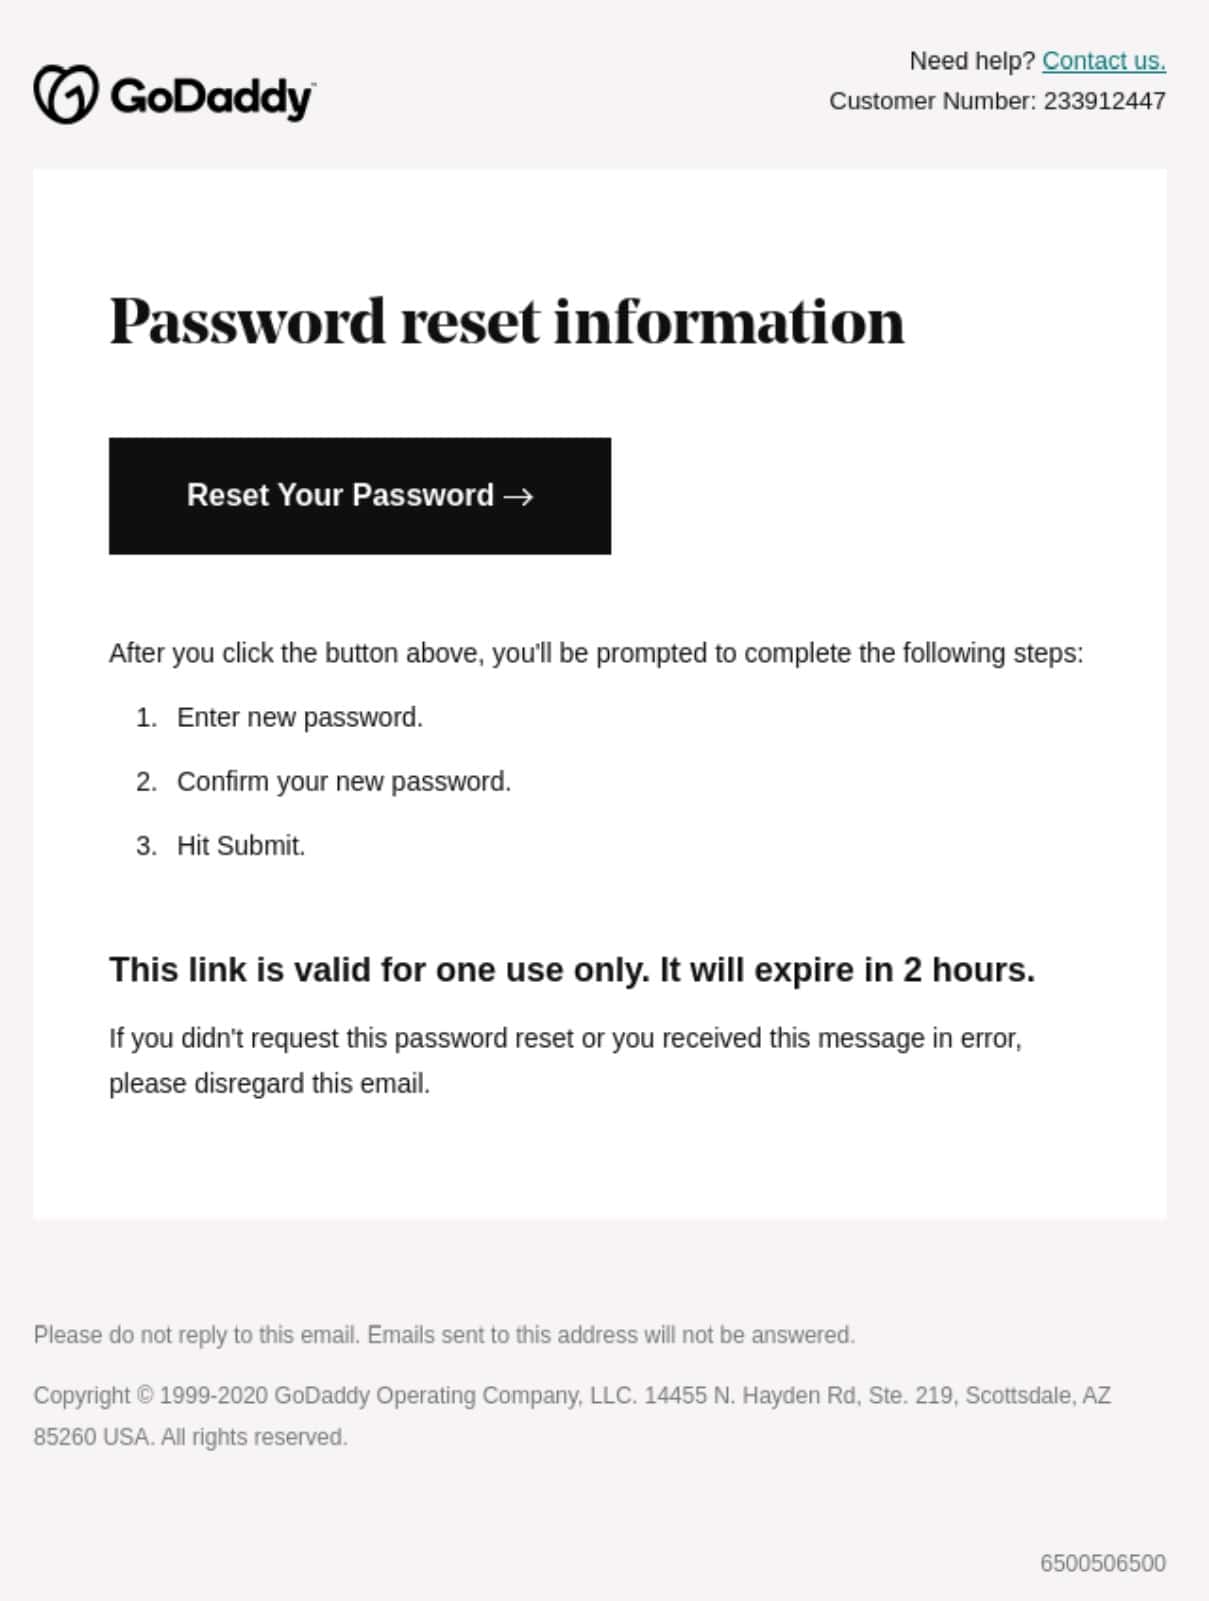 Password reset email example by GoDaddy